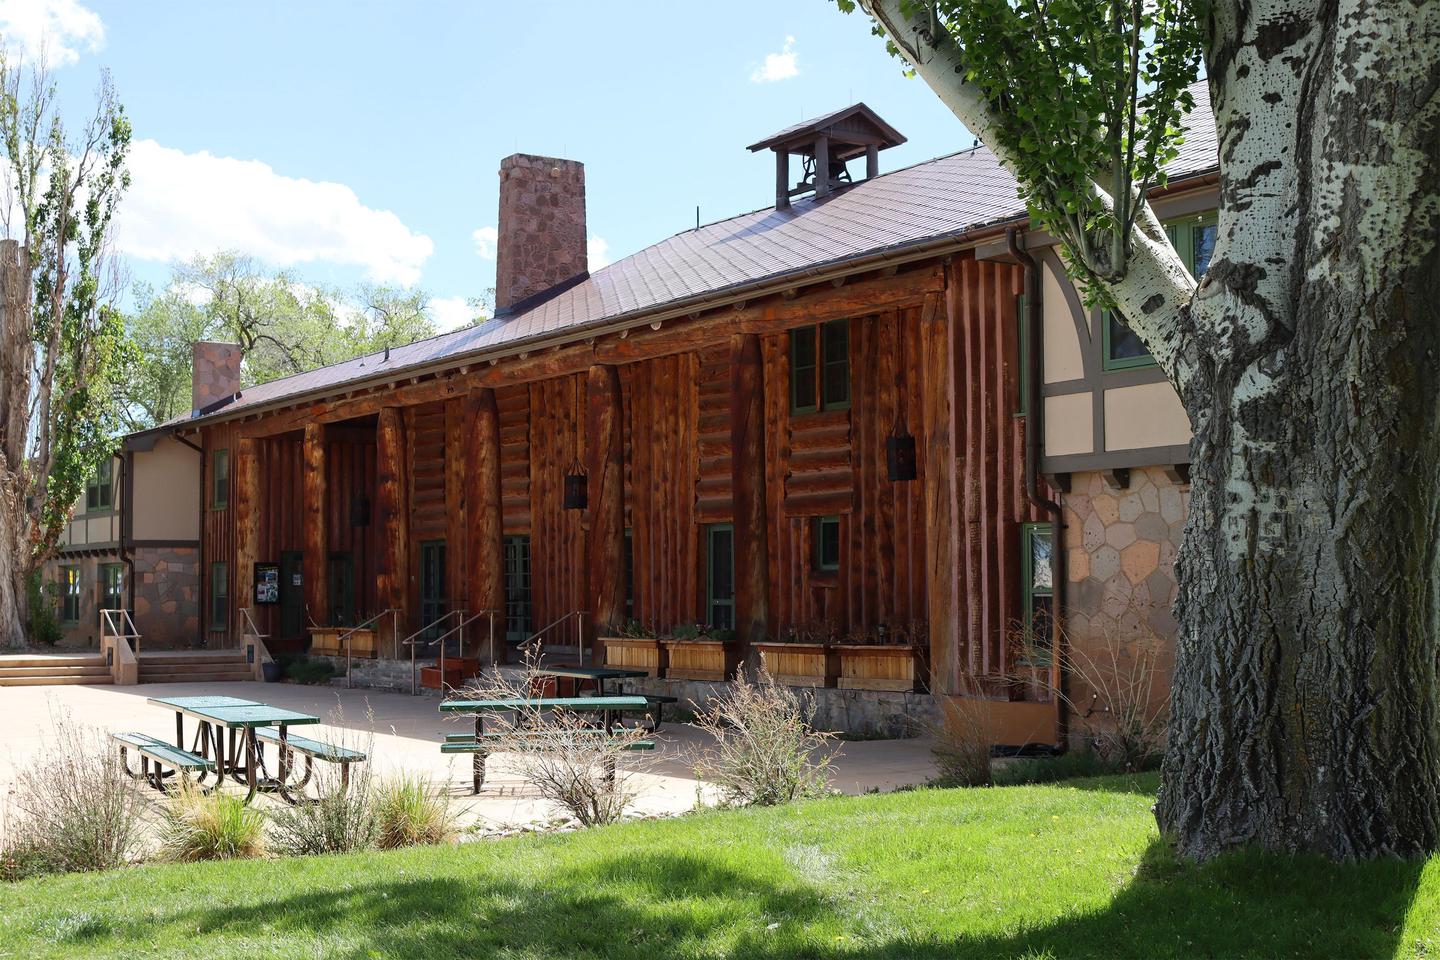 Fuller LodgeFuller Lodge is within walking distance of the visitor center.